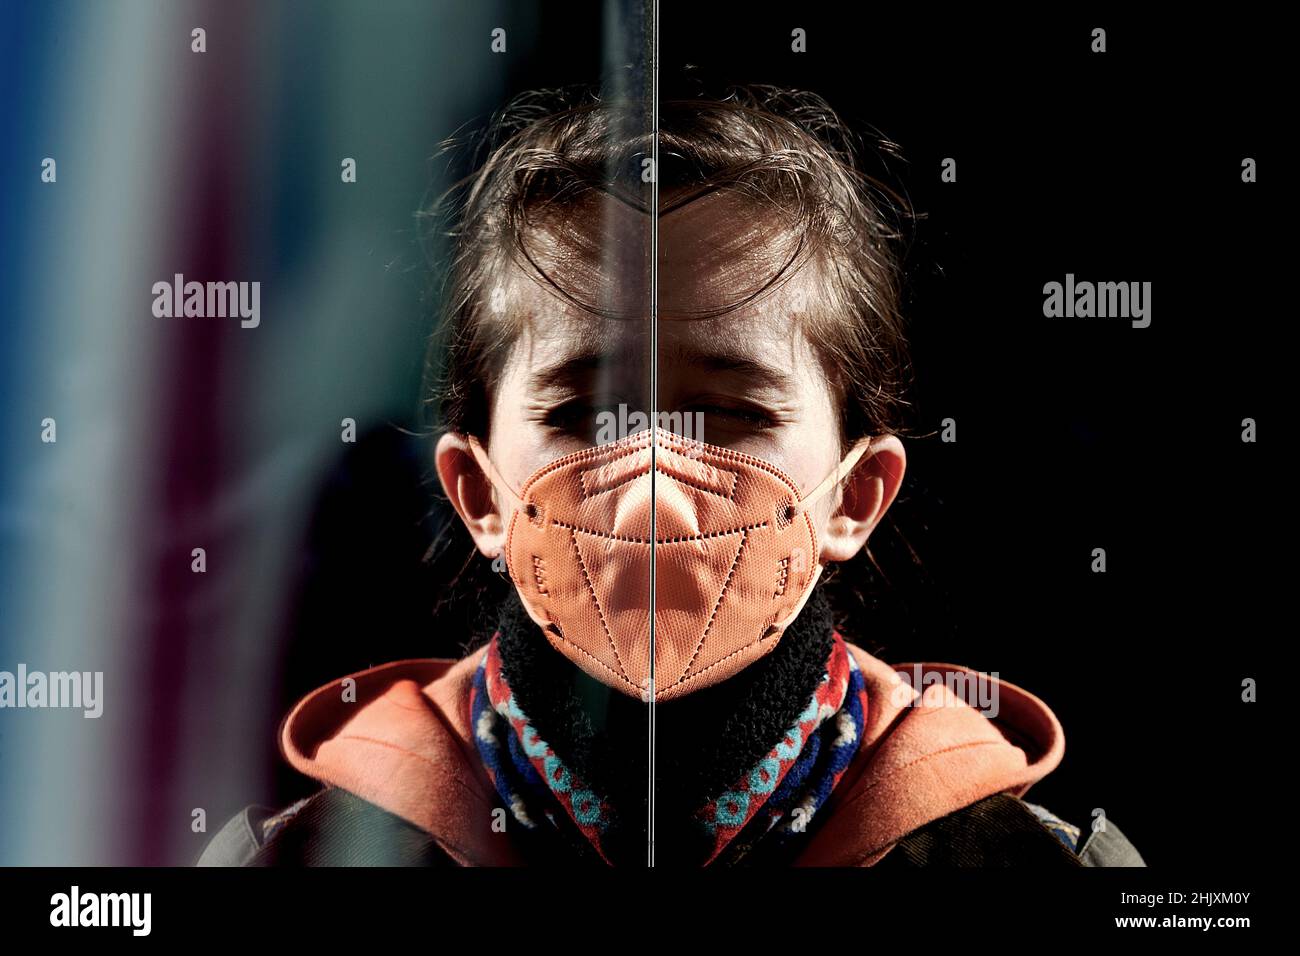 Boys face distorted in reflection. Stock Photo